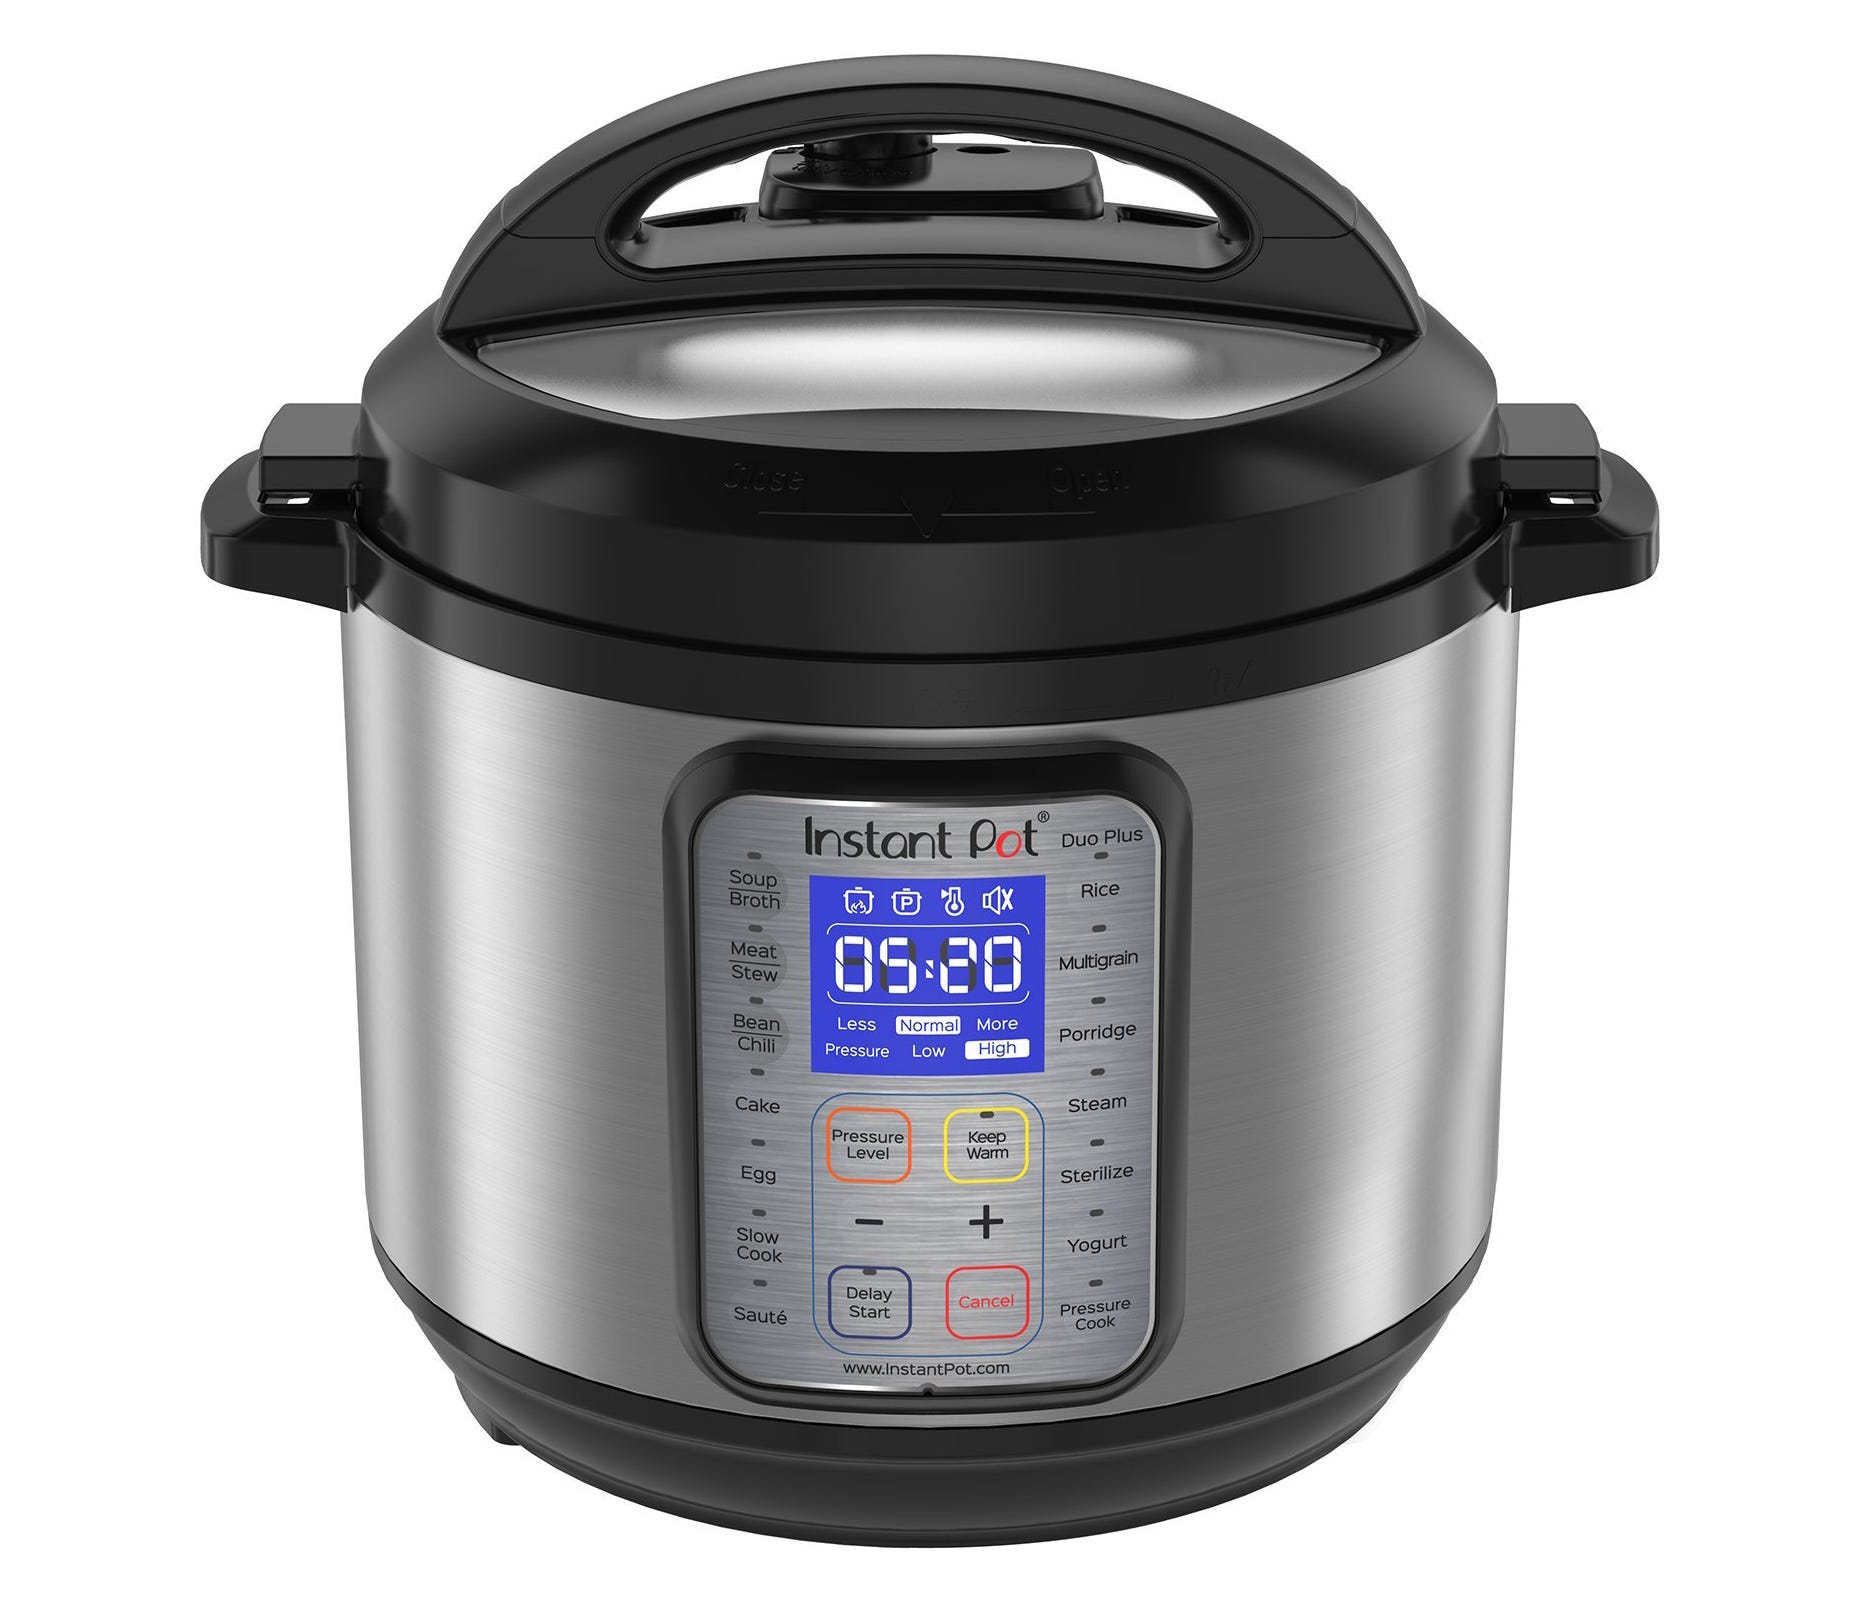 The best-selling Instant Pot is back down to its lowest price of the year